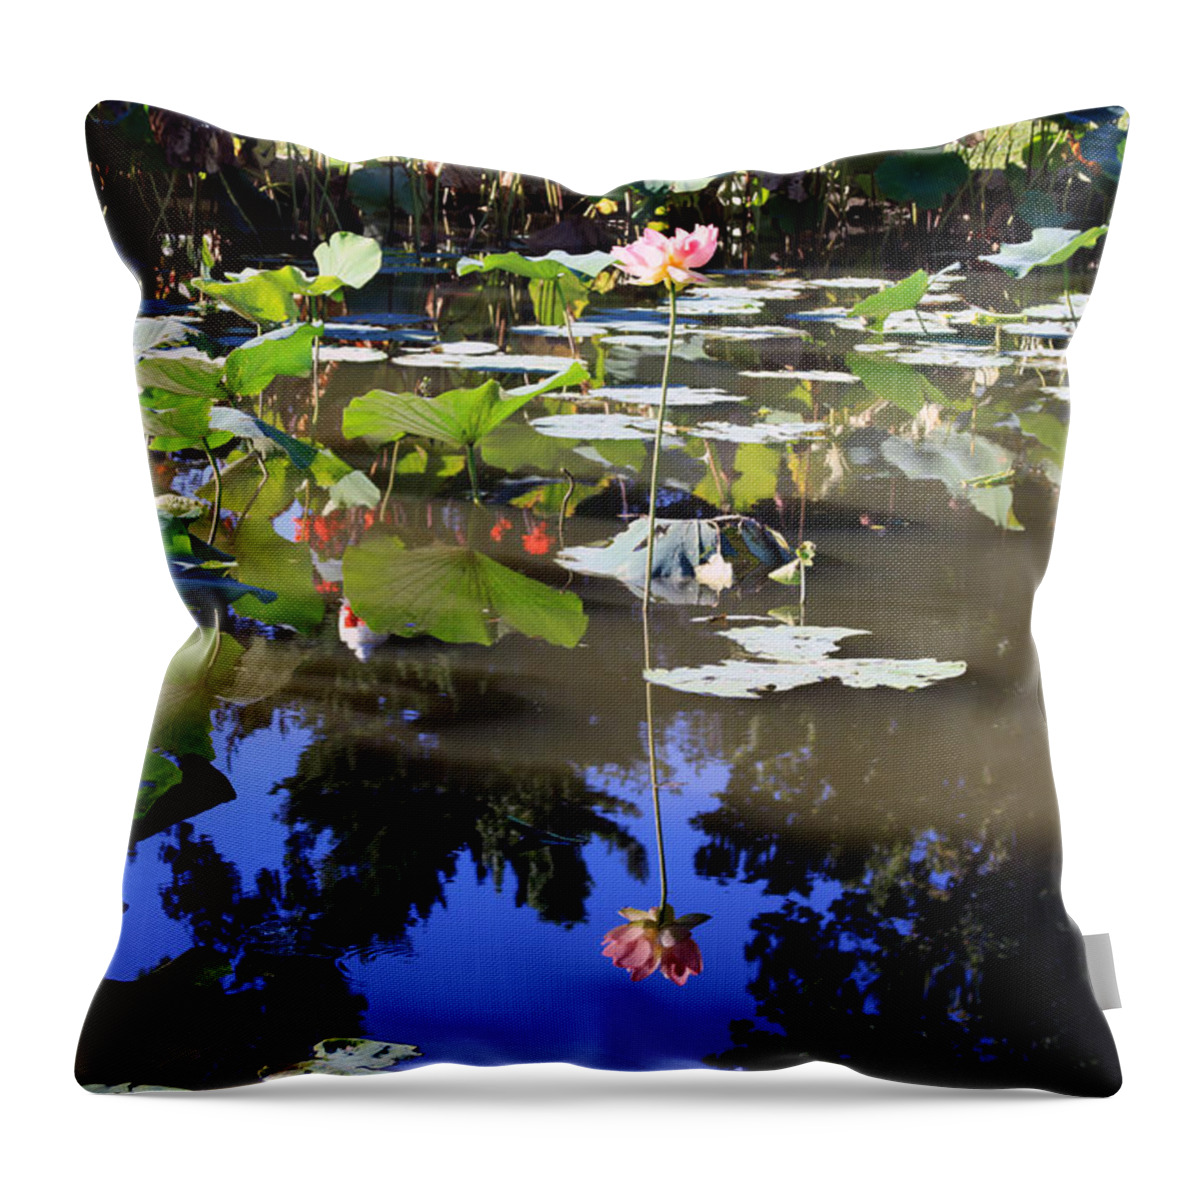 Garden Pond Throw Pillow featuring the photograph Lotus Reflection by John Lautermilch